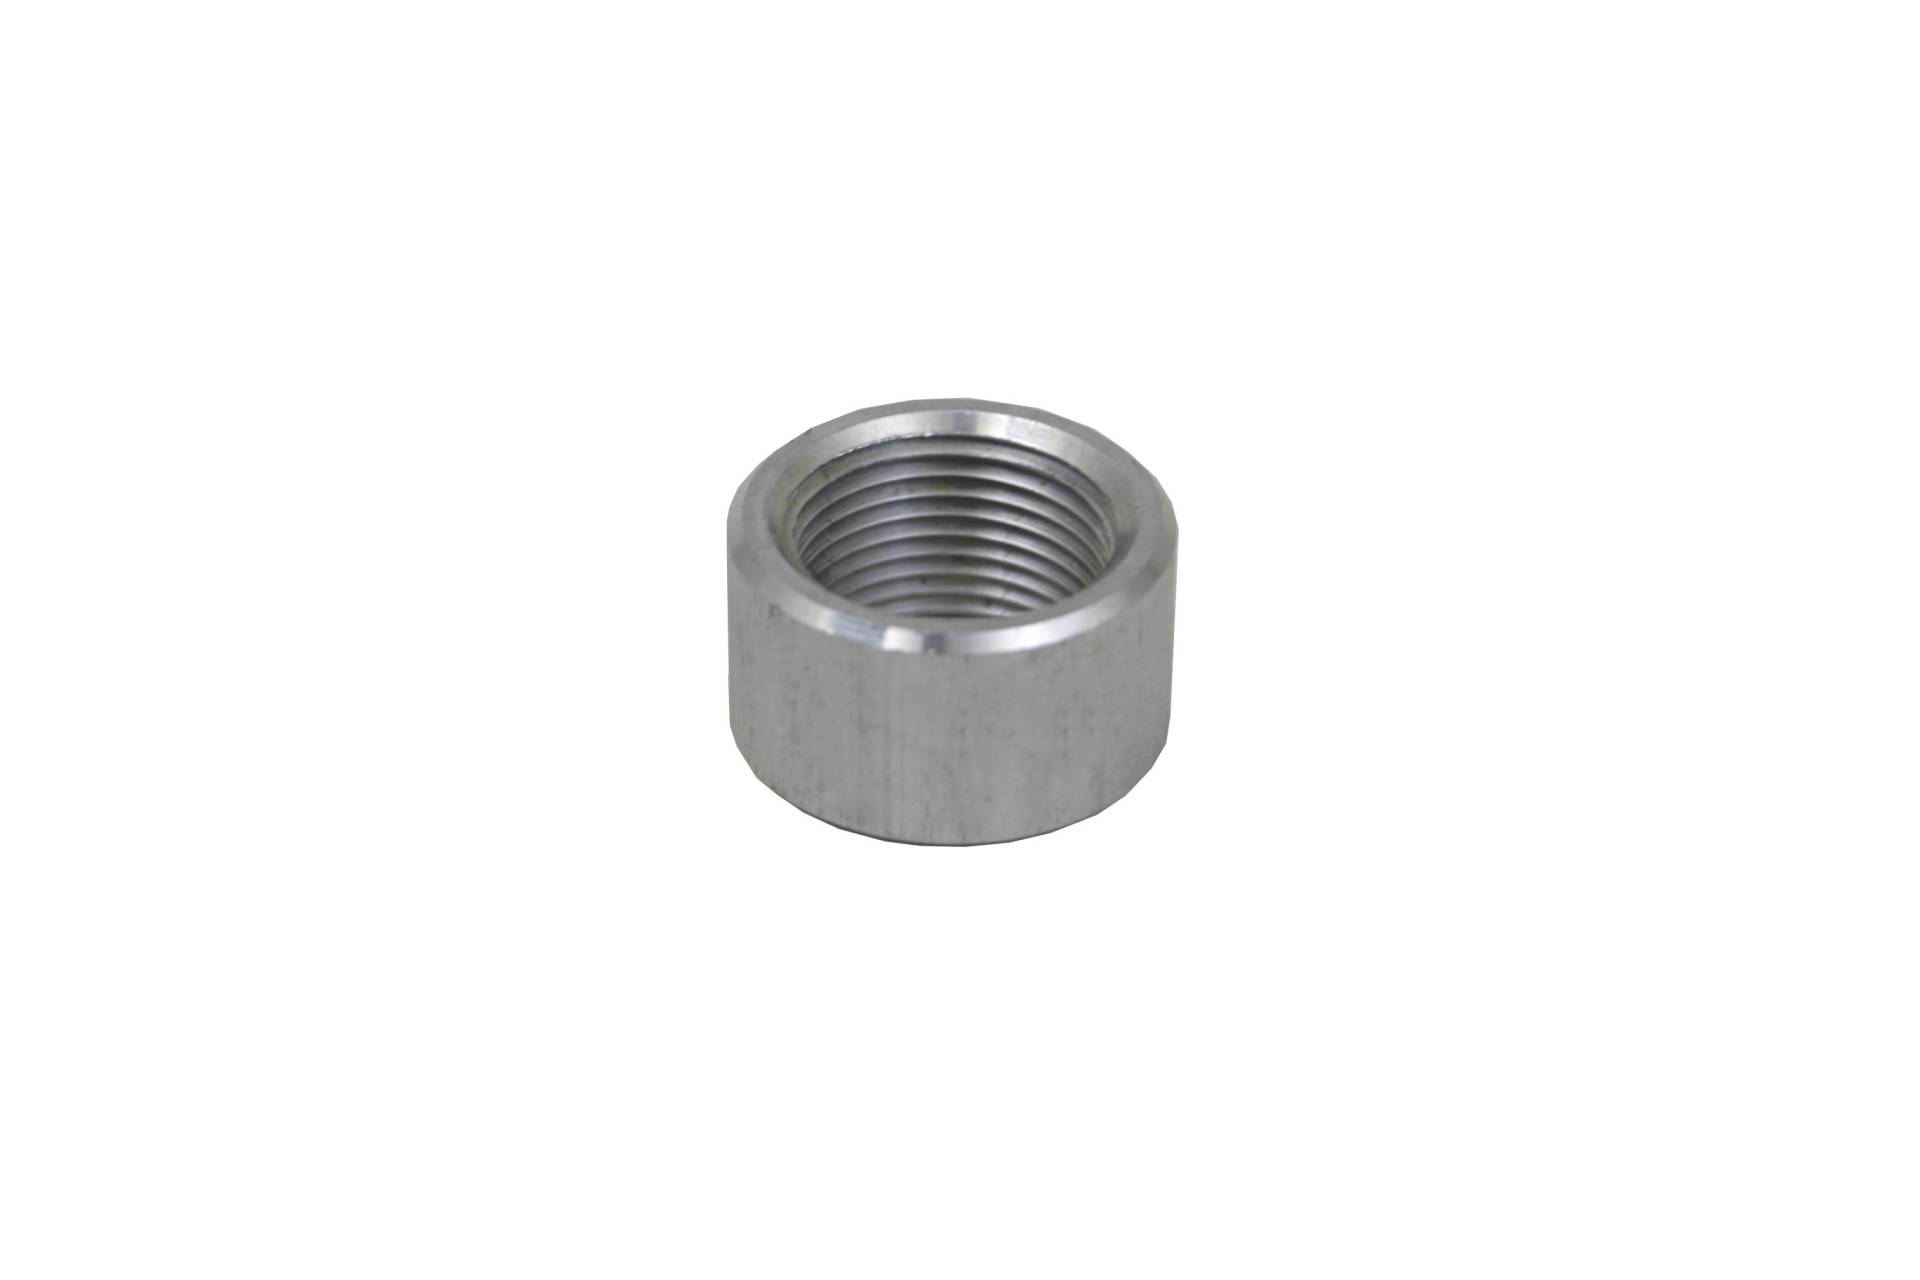 Wizard Cooling Inc - Weldable Pipe Thread Bungs 1 1/2" NPT Bung